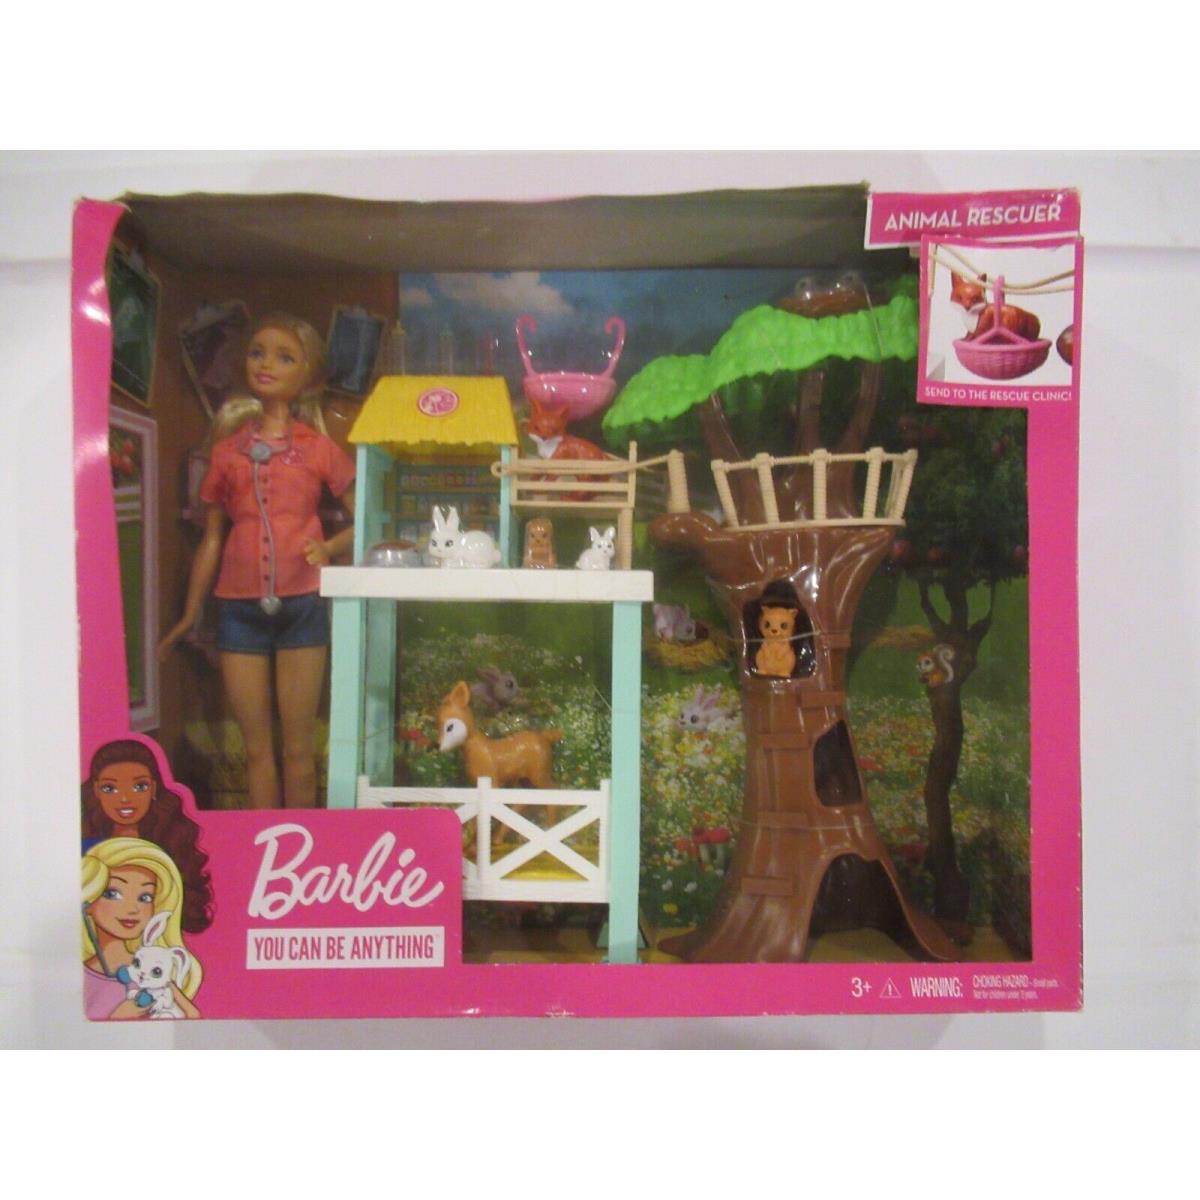 2018 Barbie Animal Rescuer Playset Never Opened